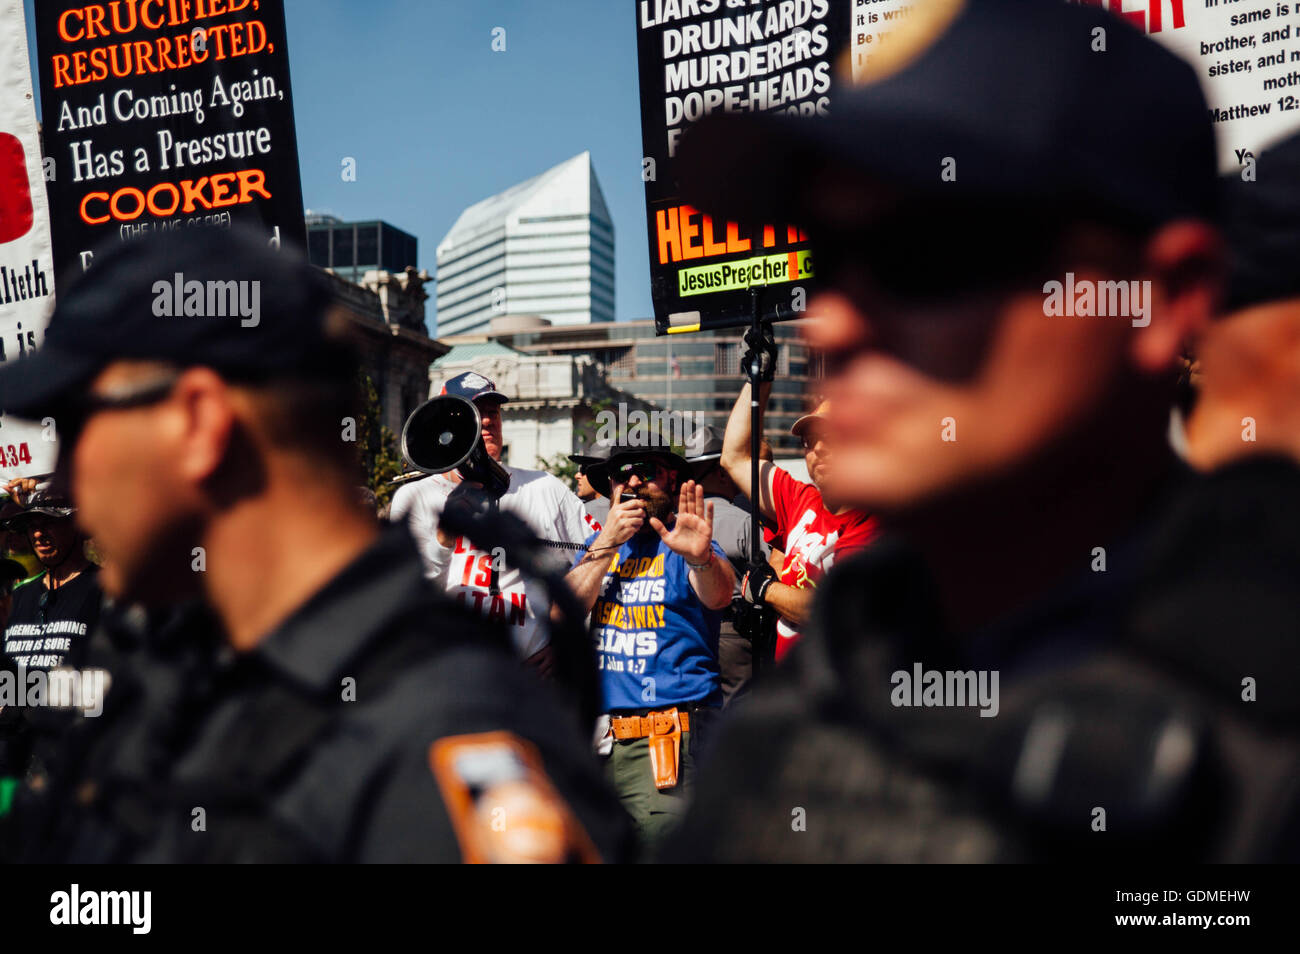 Cleveland, Ohio, USA. 19th July, 2016. Religious demonstrators are seen in Public Square in Cleveland Ohio July, 19, 2016 many activist and protest groups have arrived from across the country to demonstrat in Cleveland. Credit:  Seth Herald/ZUMA Wire/Alamy Live News Stock Photo